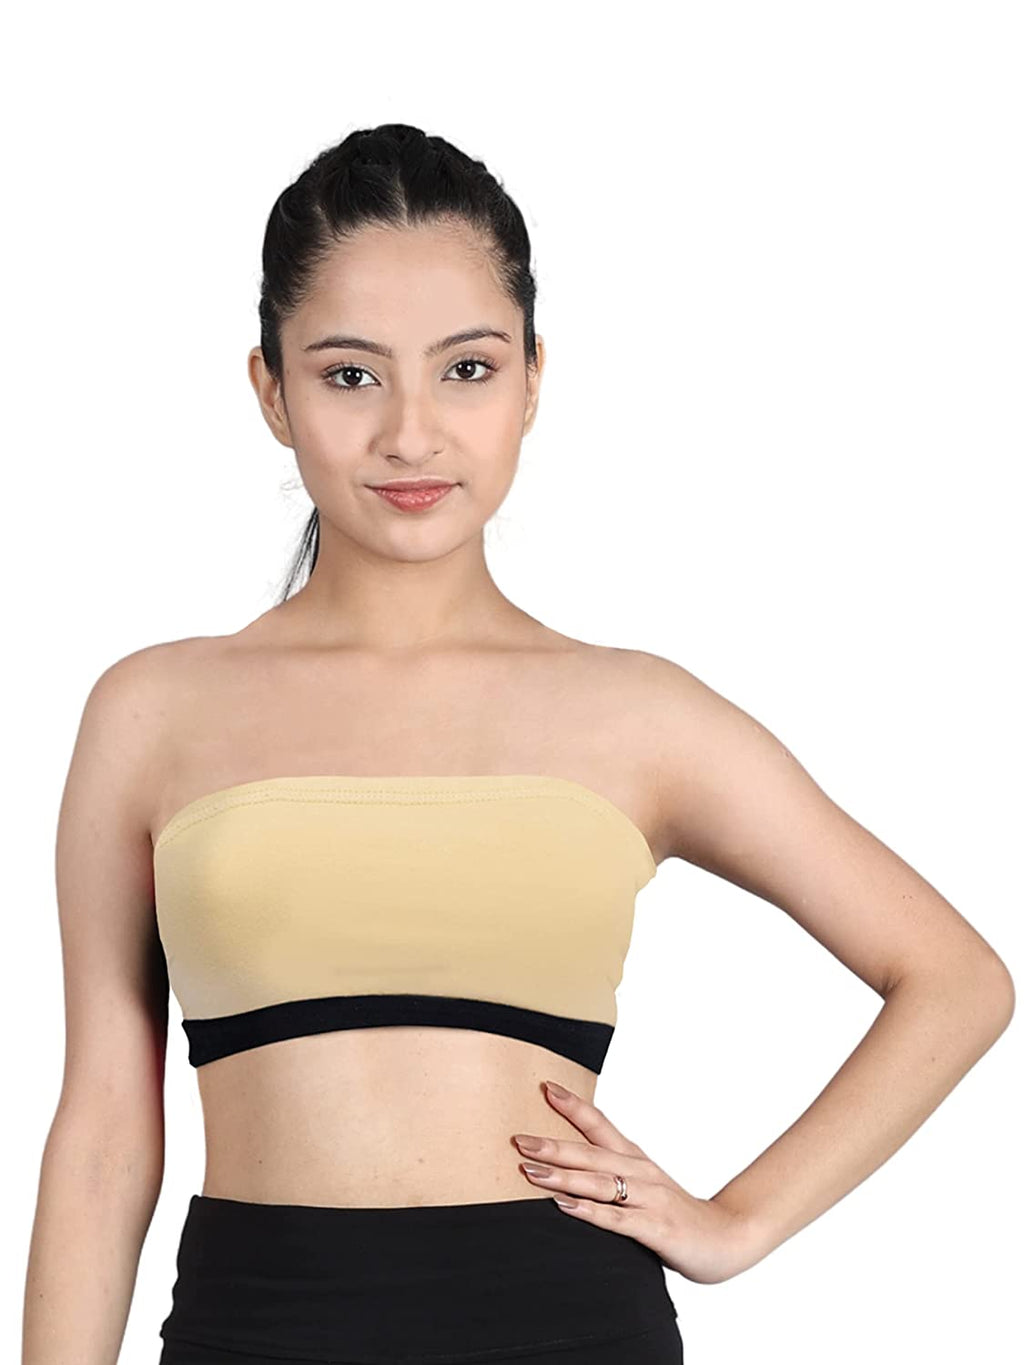 DChica Slip-on Strapless Bra for Teenagers, Girls Beginners Bra Sports  Cotton Non-Wired Non-Padded Crop Top Bra Full Coverage Seamless Gym Stylish